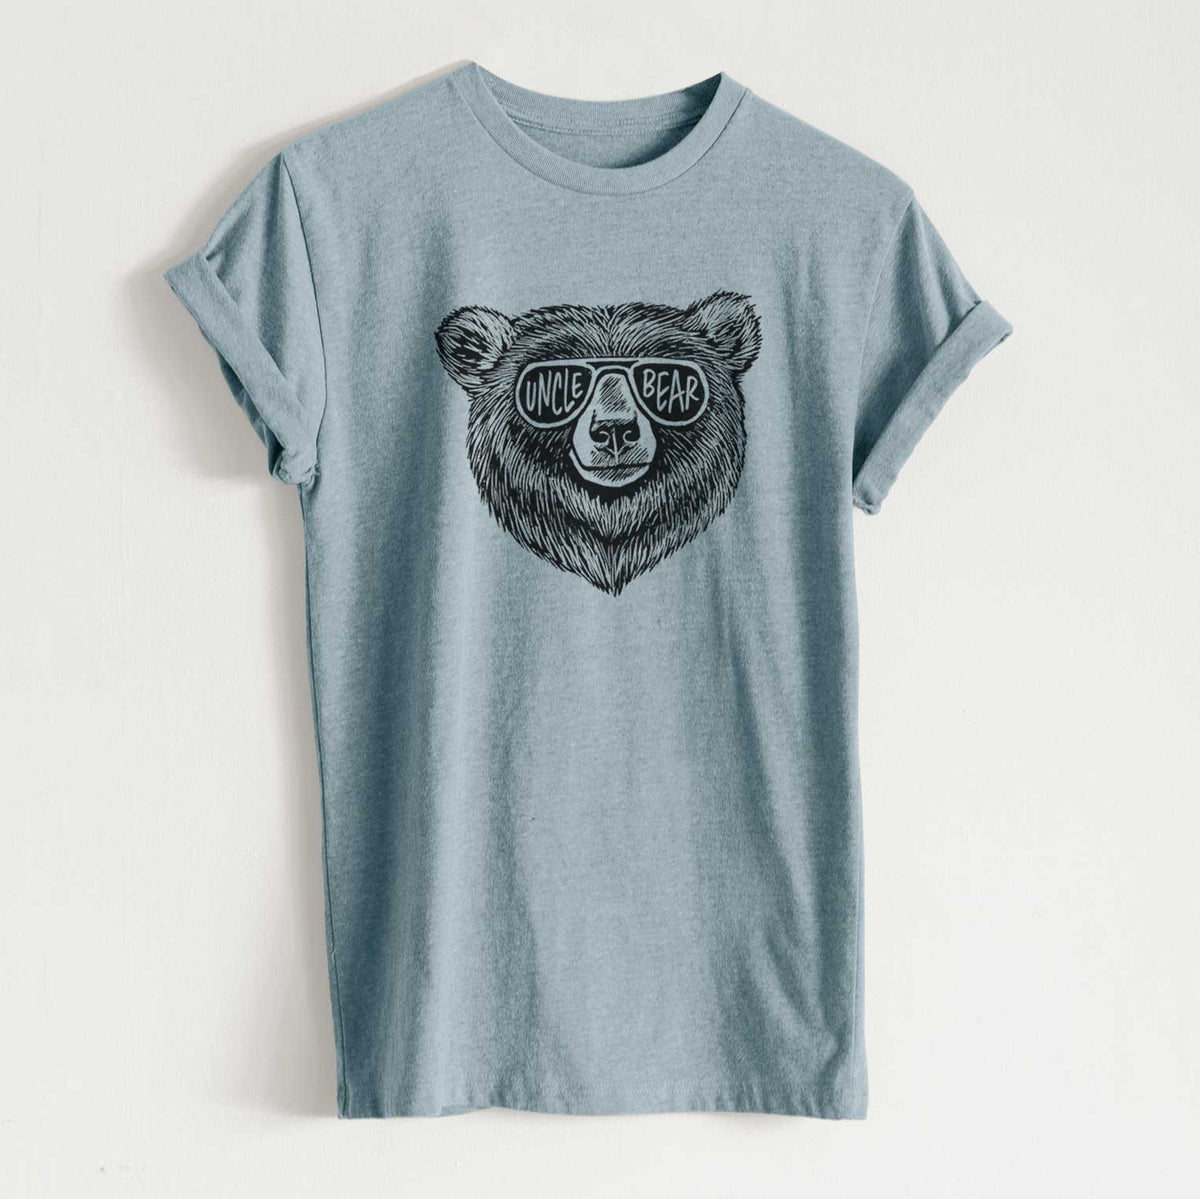 Uncle Bear - Unisex Recycled Eco Tee  - CLOSEOUT - FINAL SALE